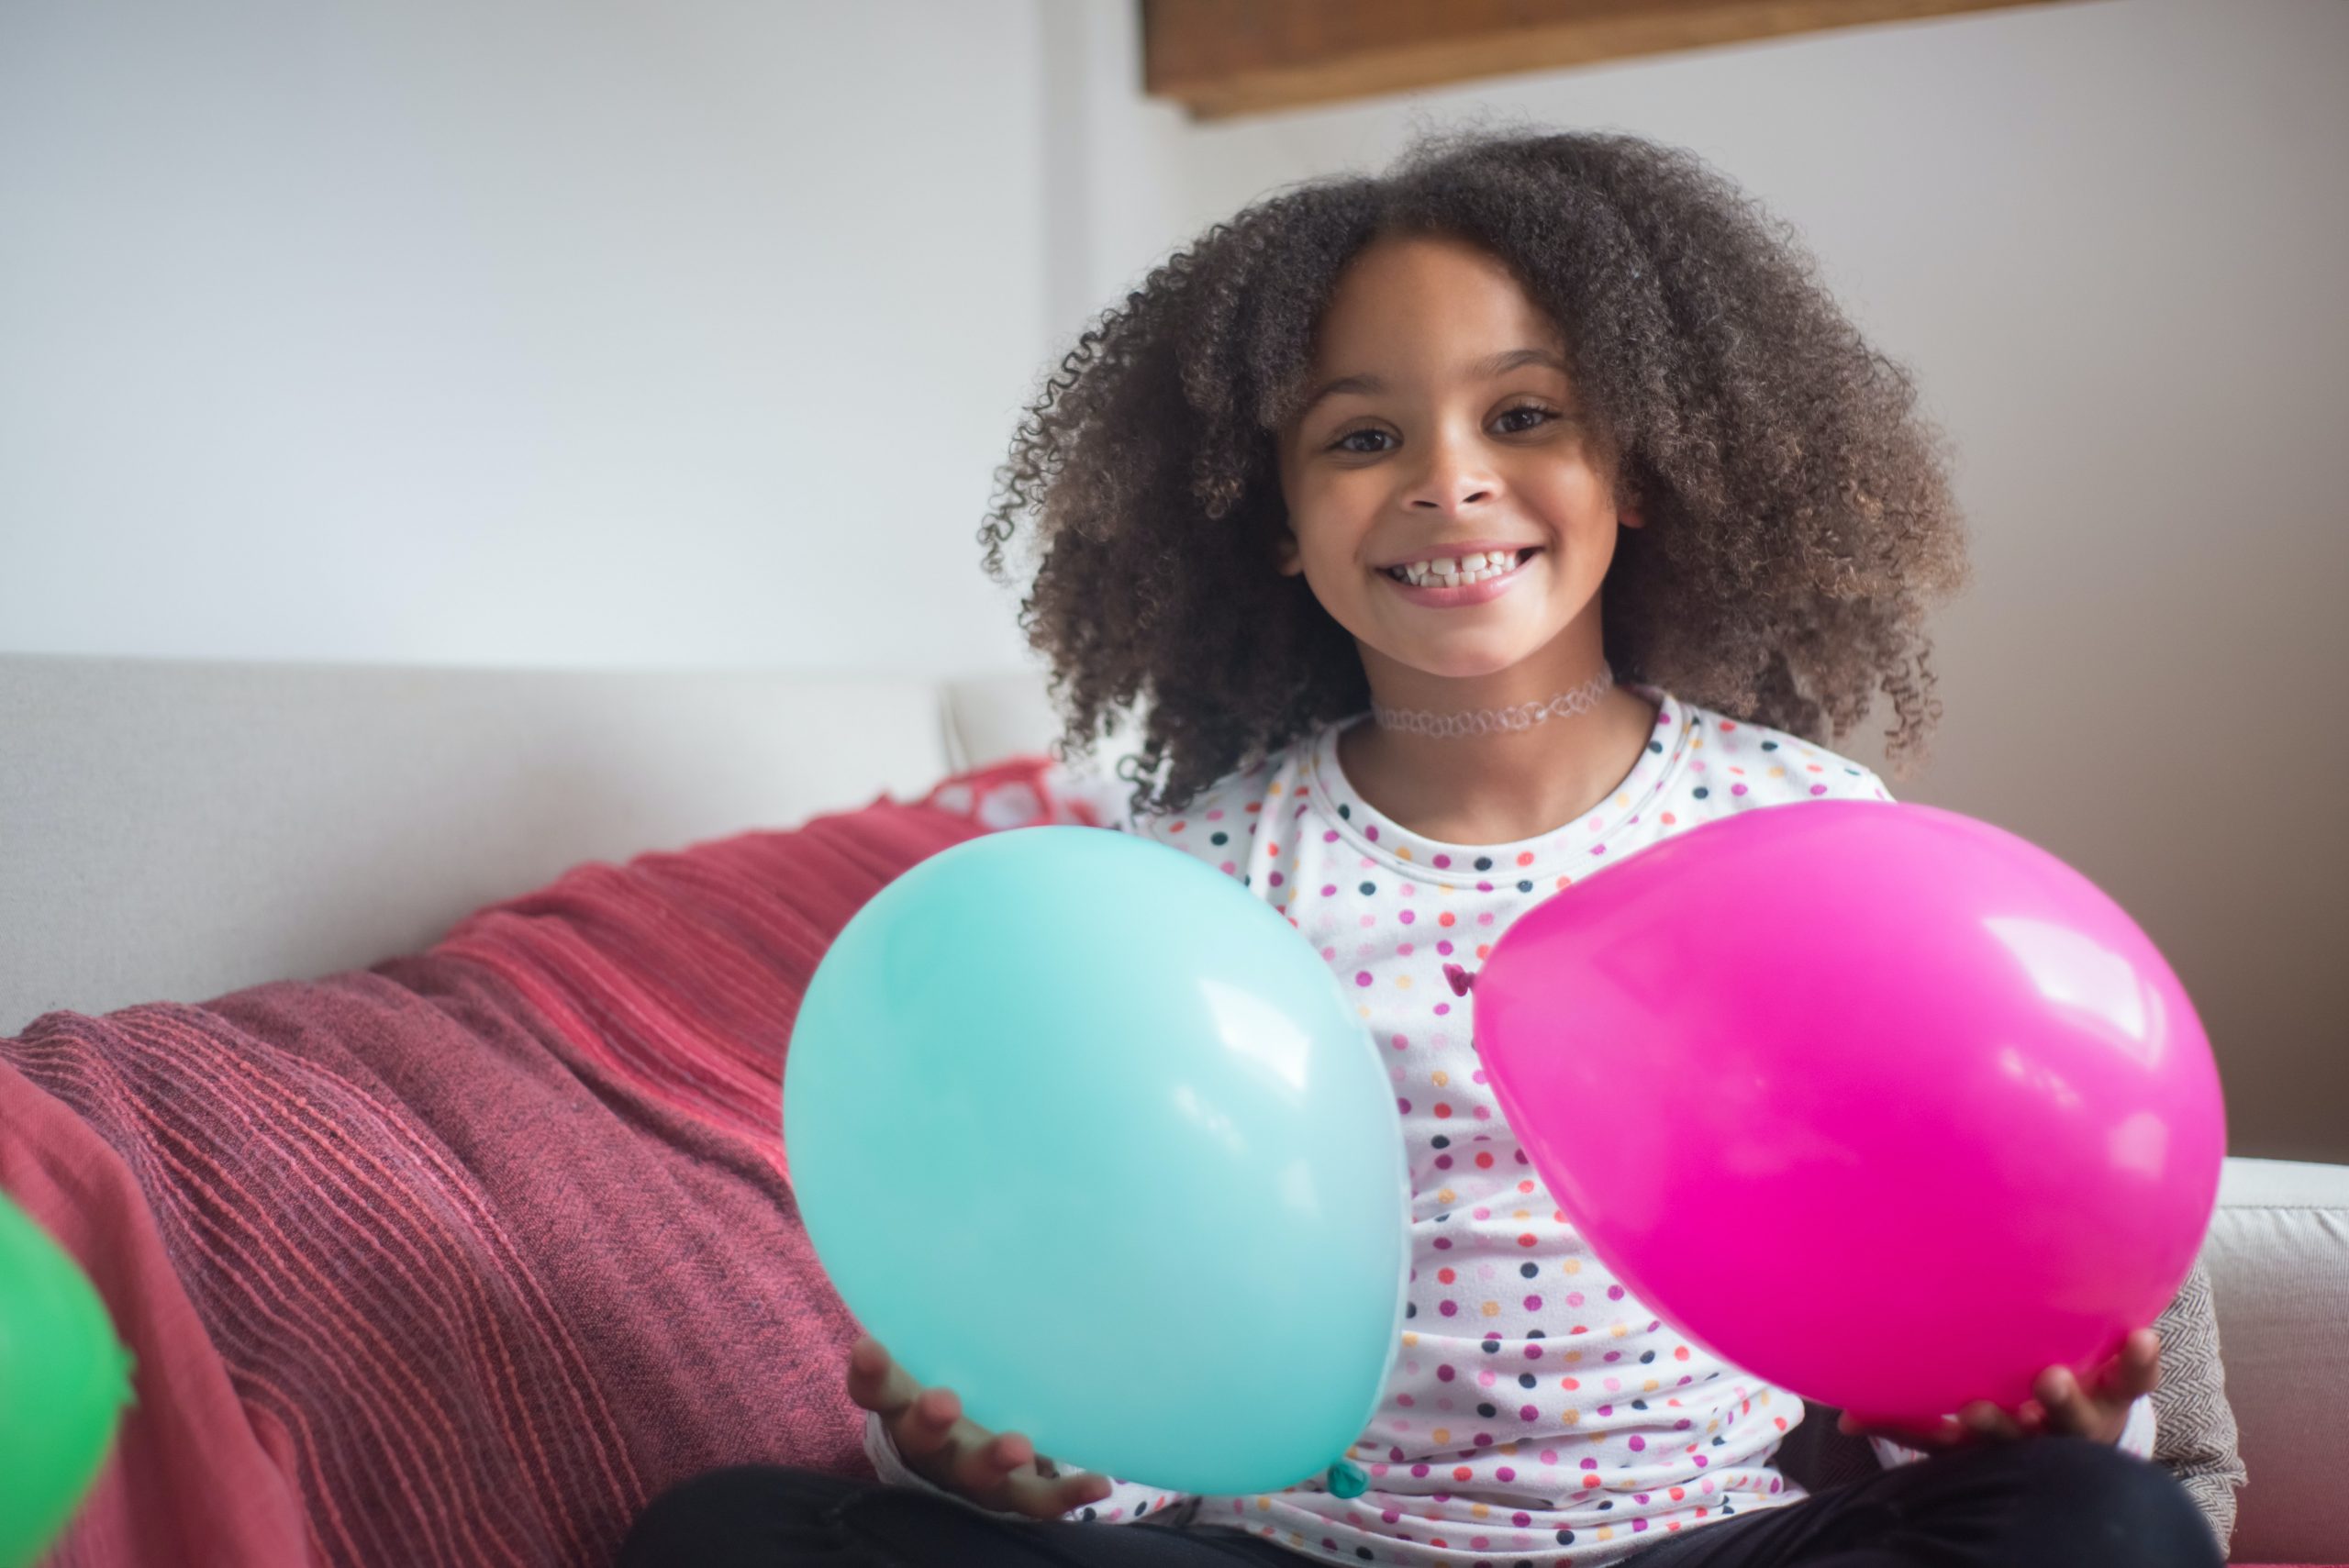 A smiling girl is holding two balloons